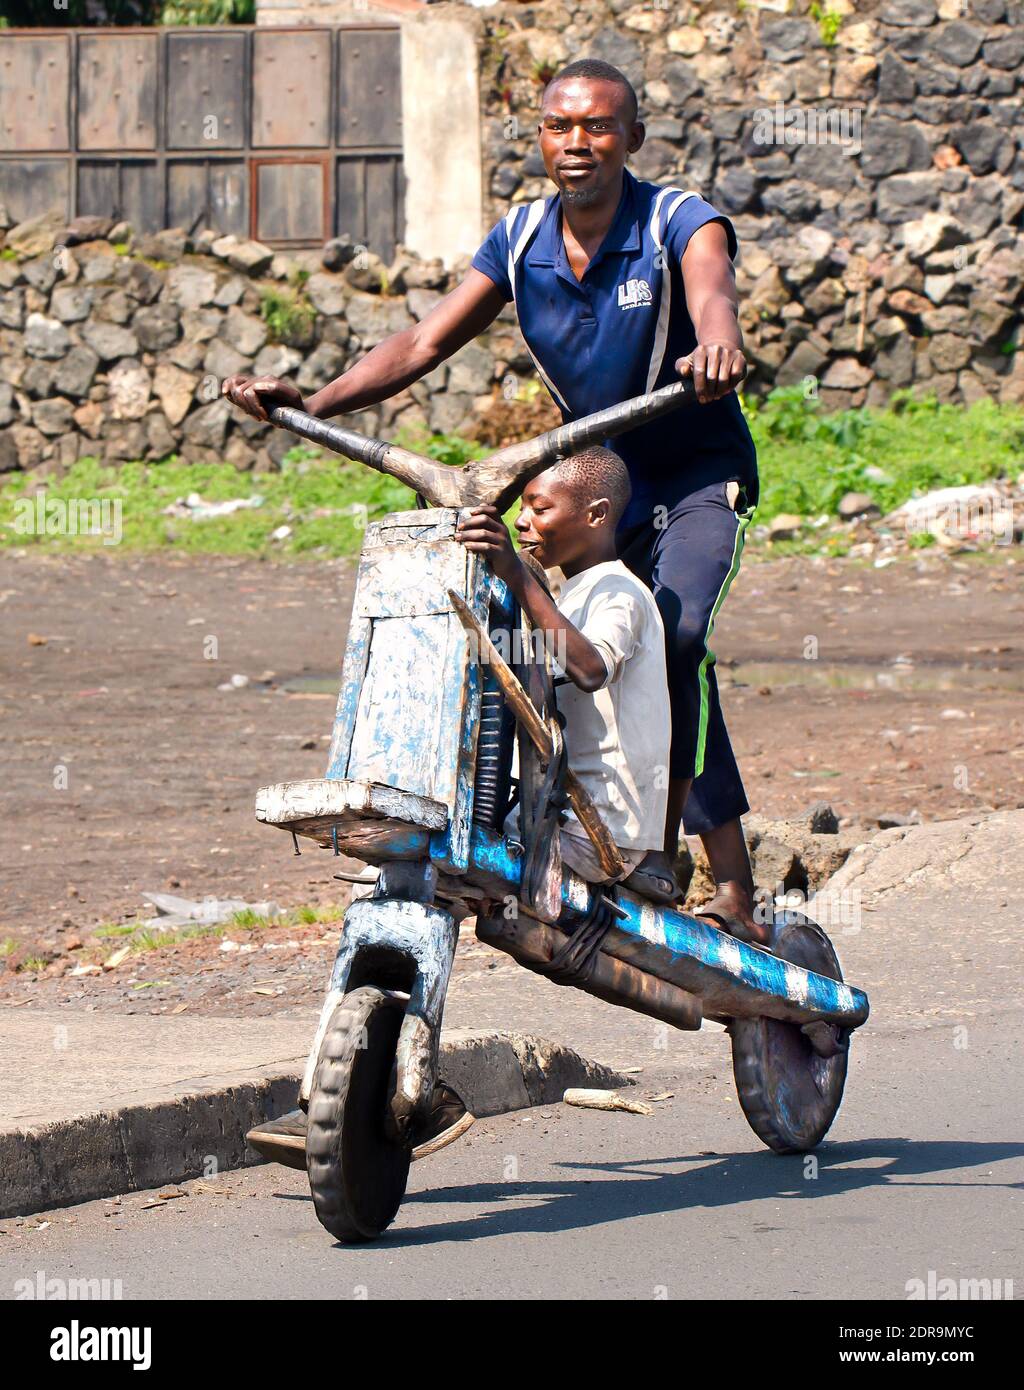 Wooden scooters in the image are called chukudu. They are common sight in Goma, North Kivu, Democratic Republic of Congo Stock Photo